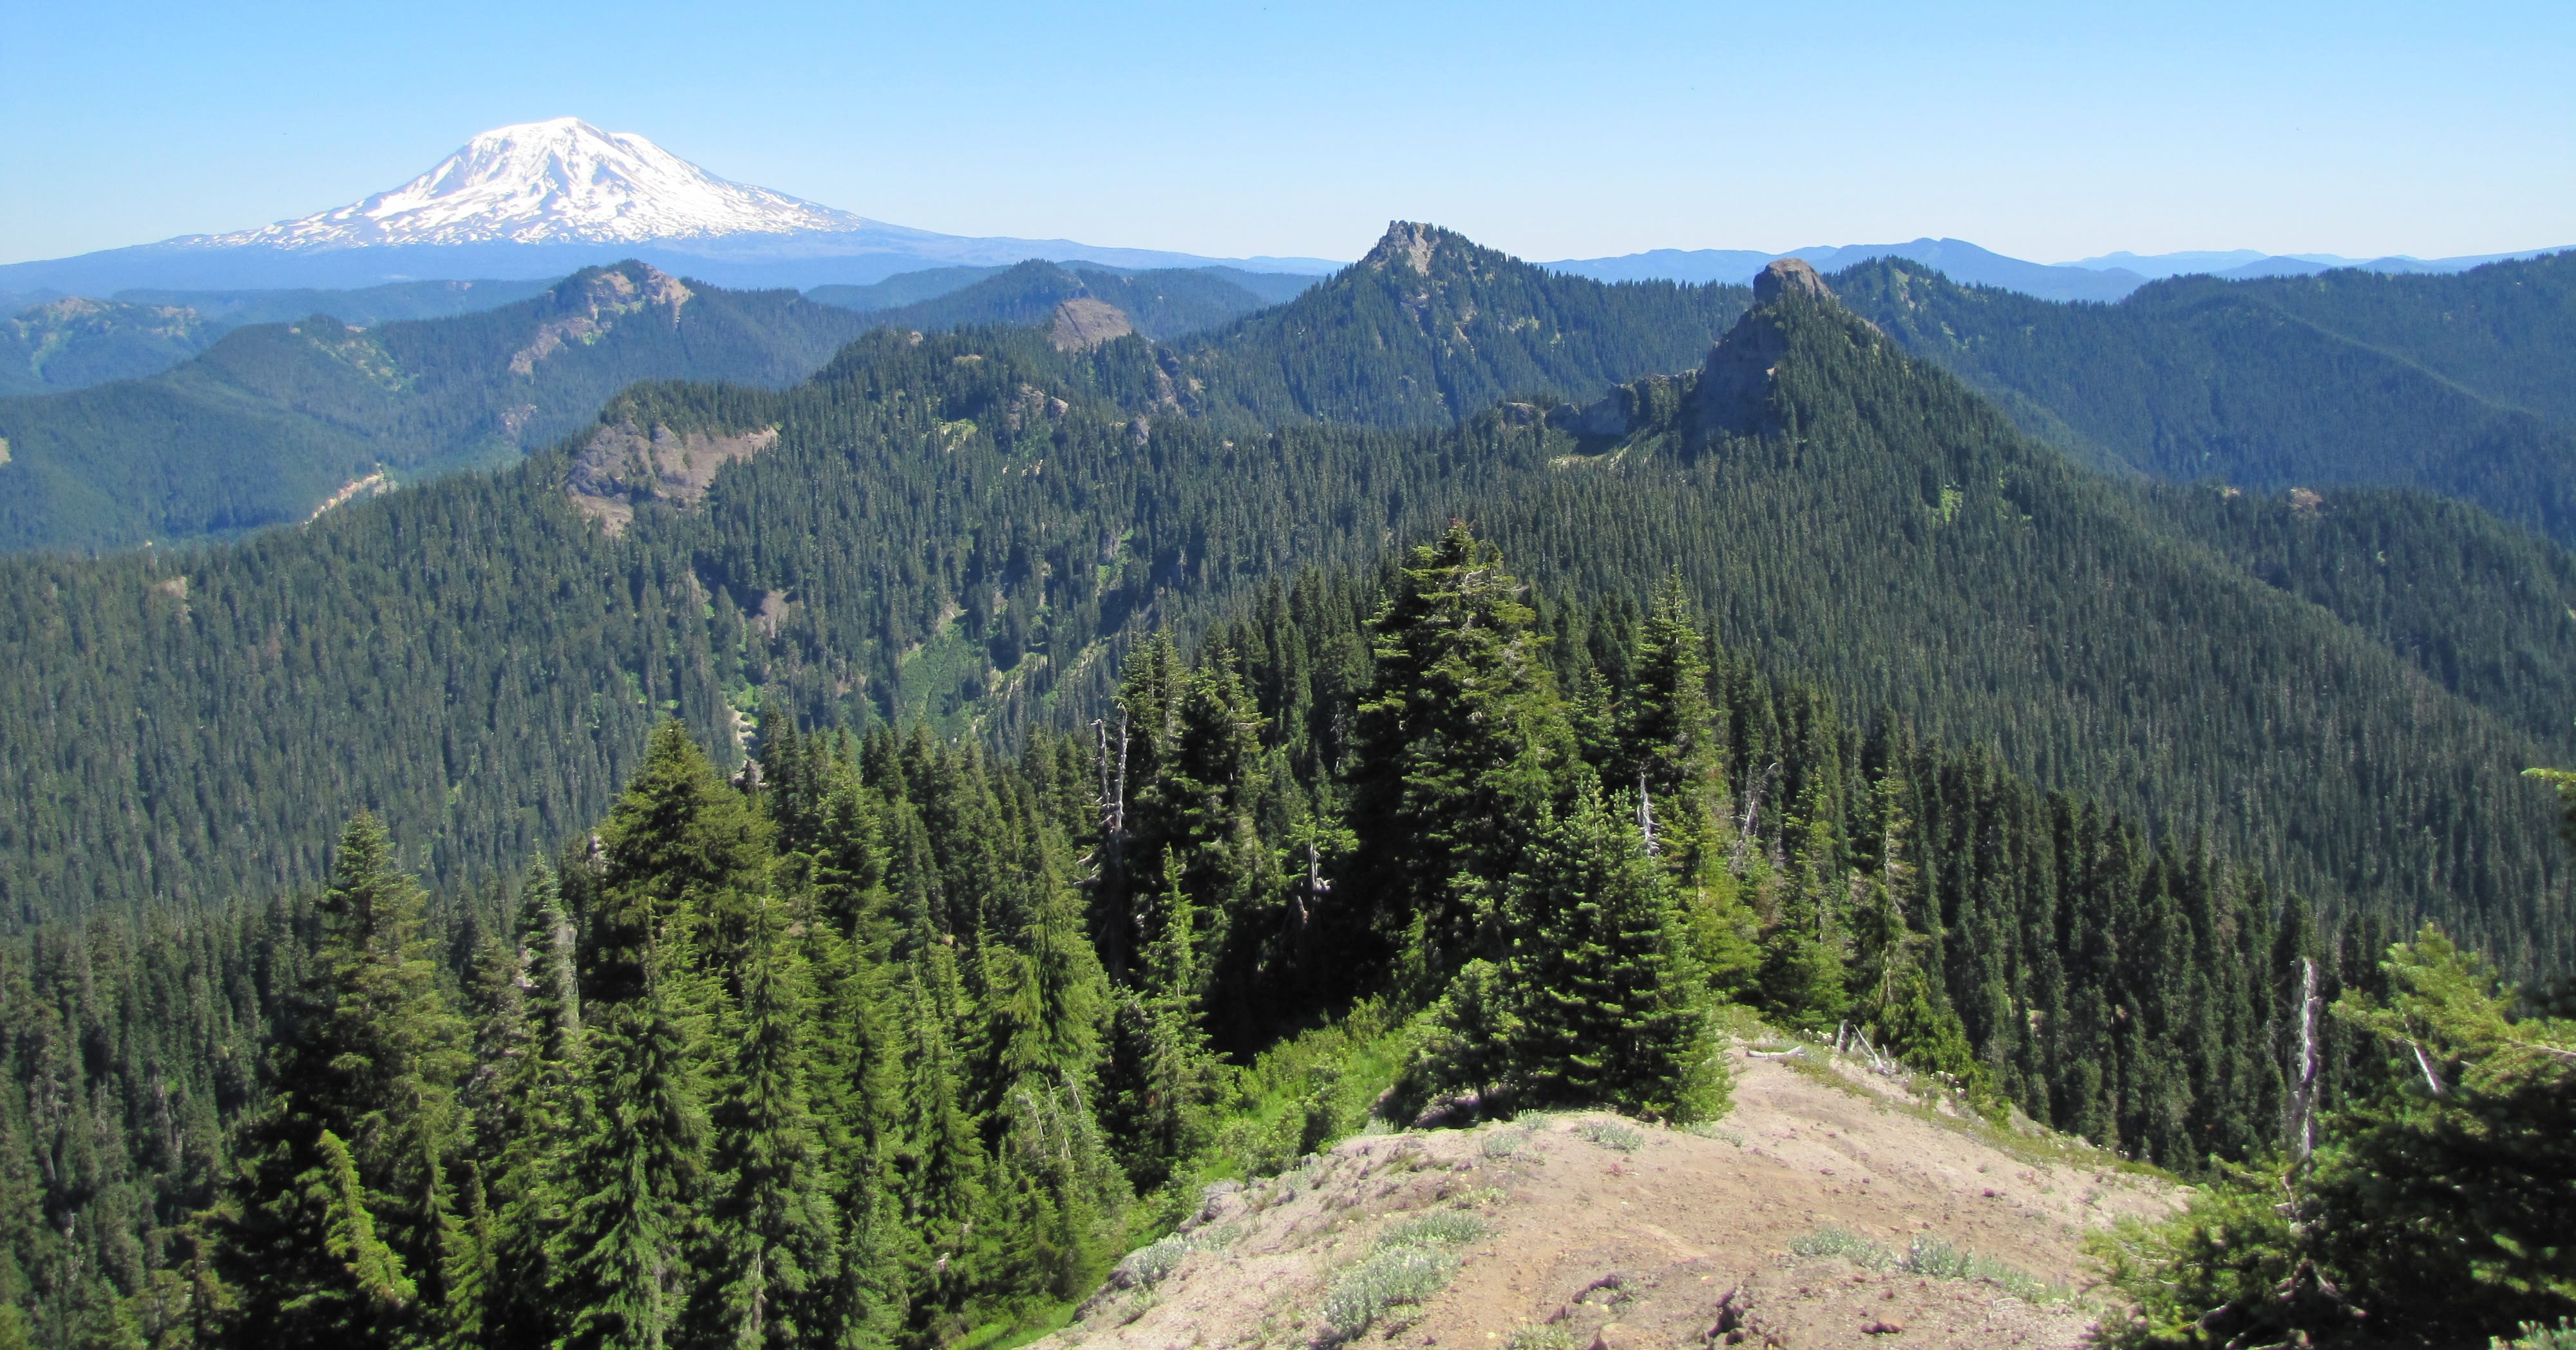 From the summit of Badger Peak, hikers get a view of the peaks and rocks of the Dark Divide roadless area, plus can see Mount Adams on the eastern horizon.